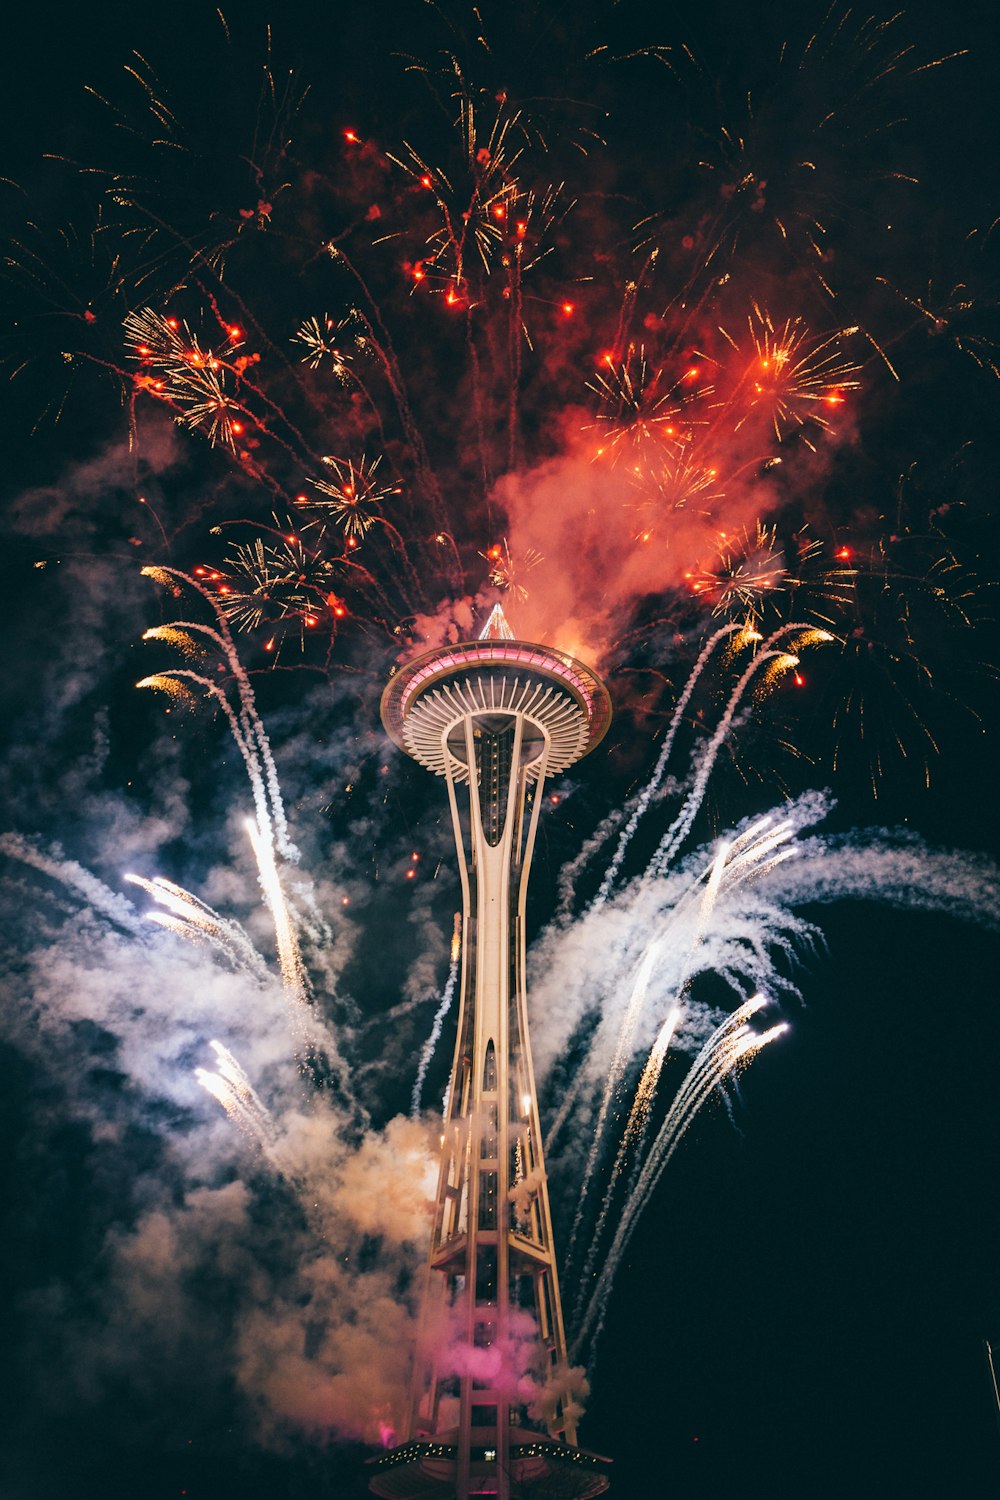 Space Needle, Seattle surrounded by fireworks